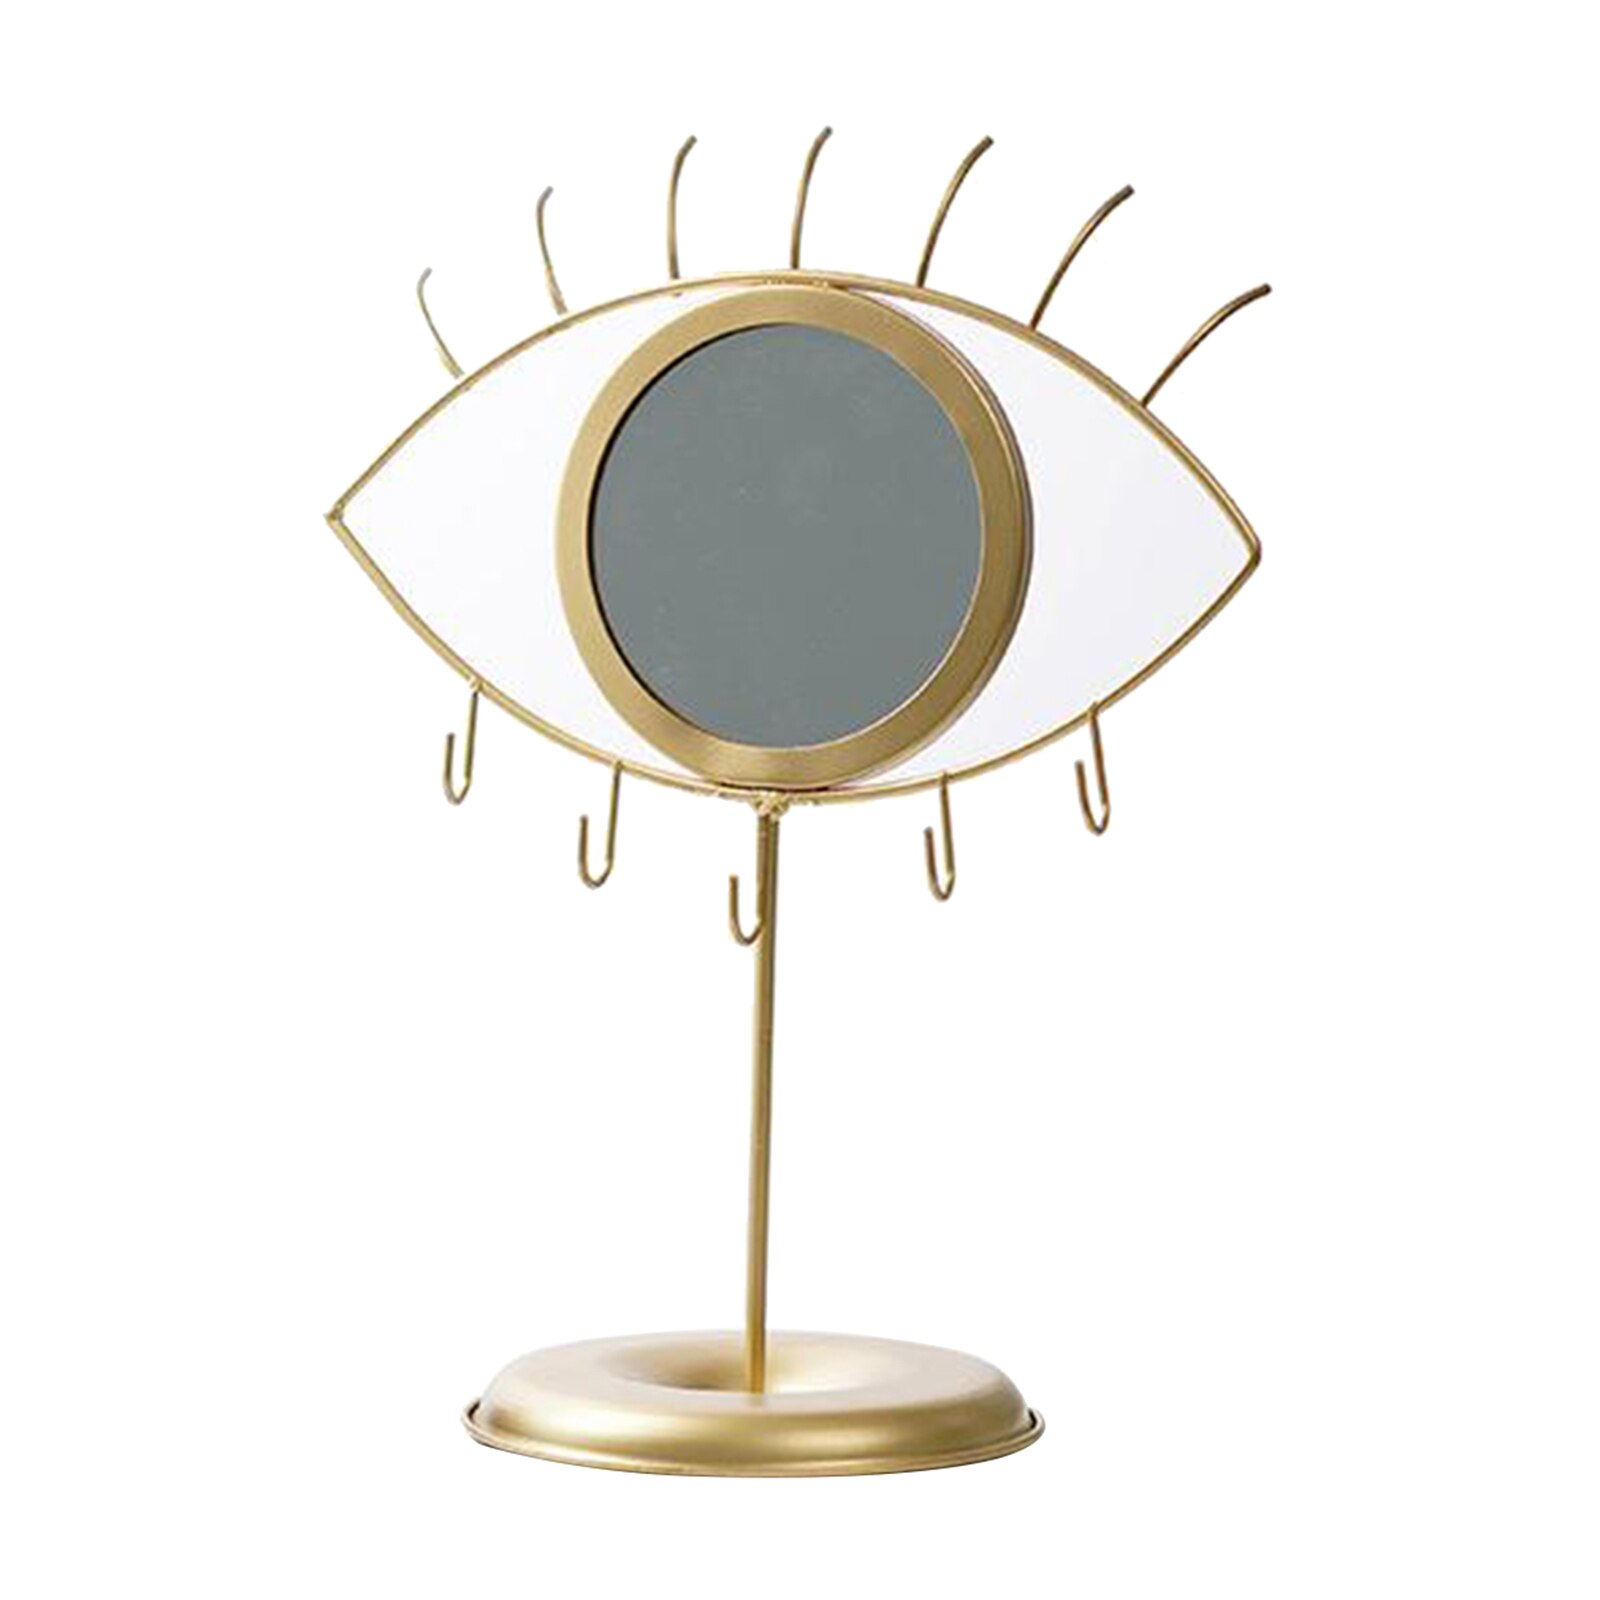 Tabletop Eye Shaped Mirror with Jewelry Holder,Modern Decorative Necklace er